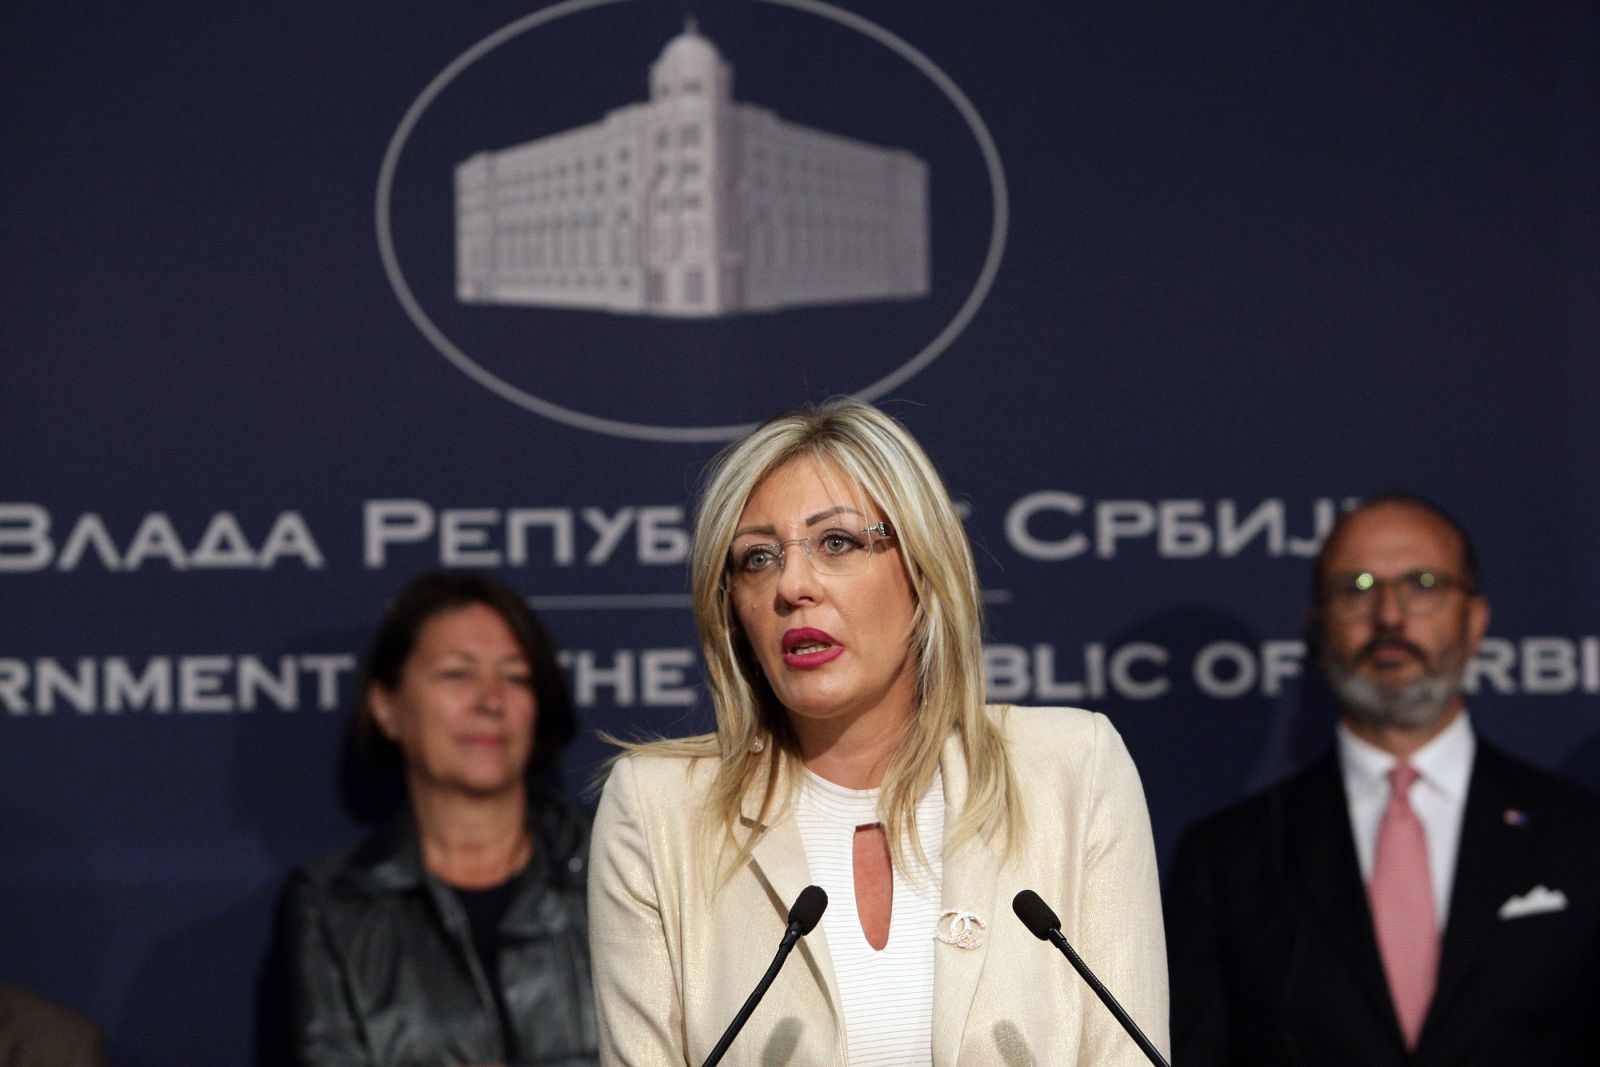 Ј. Joksimović: We are not late in sending an invitation to the OSCE  